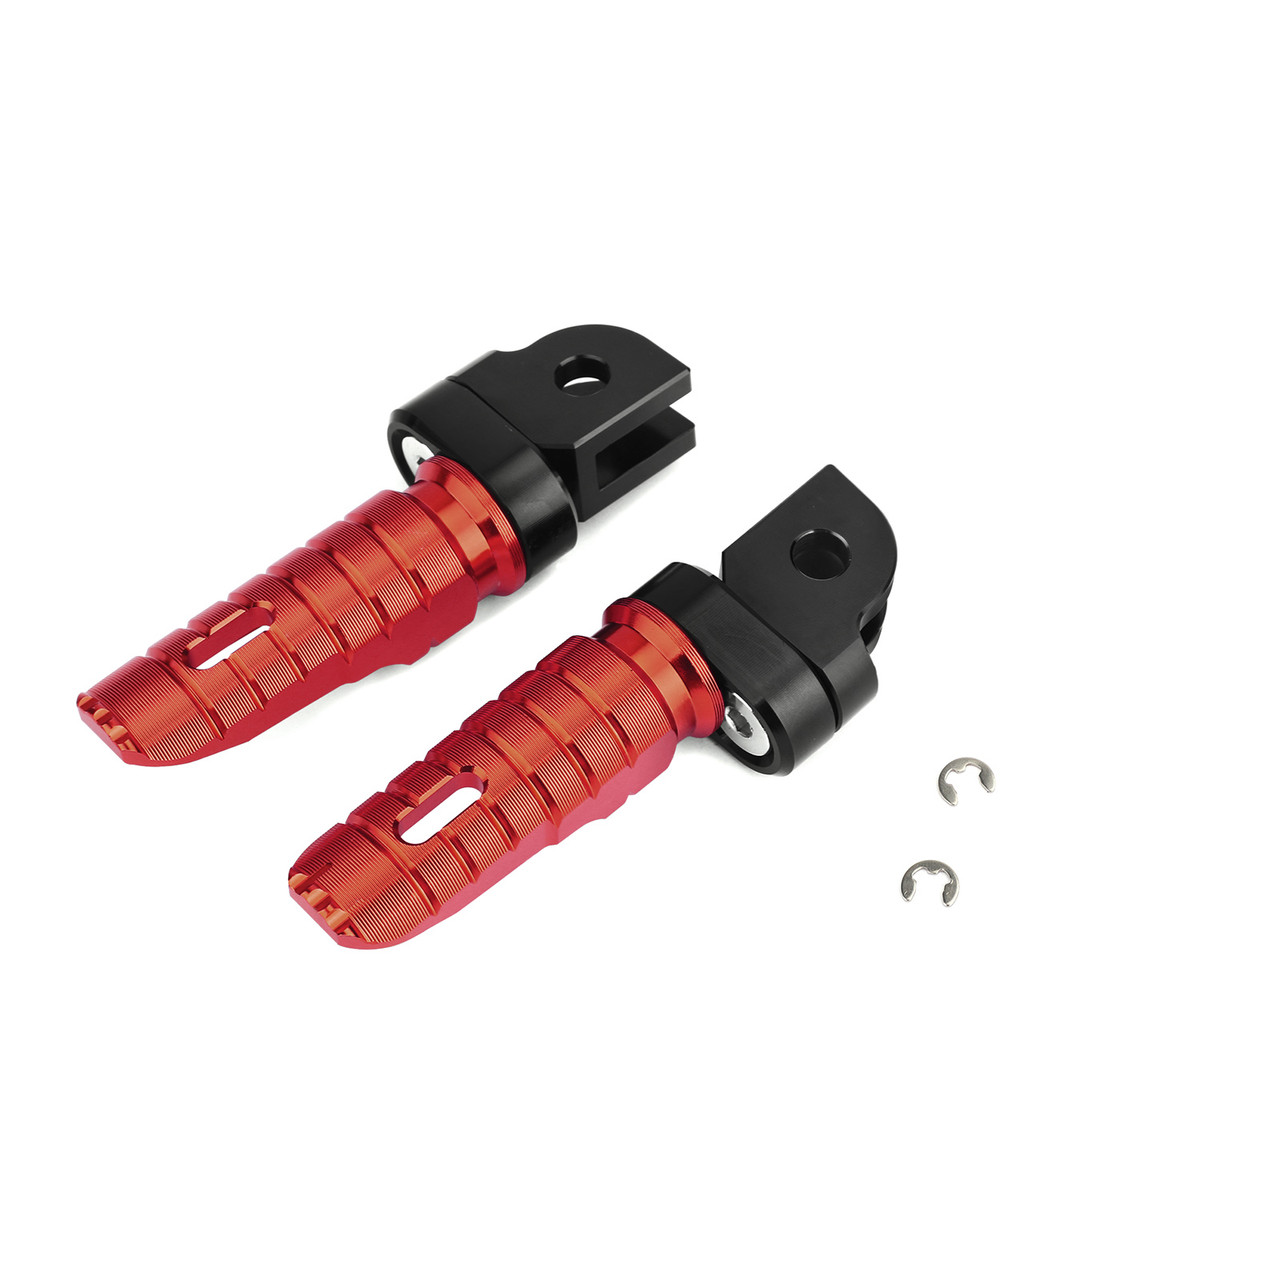 Front Footpegs Fit For YAMAHA XJR 1200 94-97 1300 98-18 MT-10 FZ-10 XSR 700 900 16-20 MT-07 FZ-07 14-20 FZS 600FAZER 98-03 Red